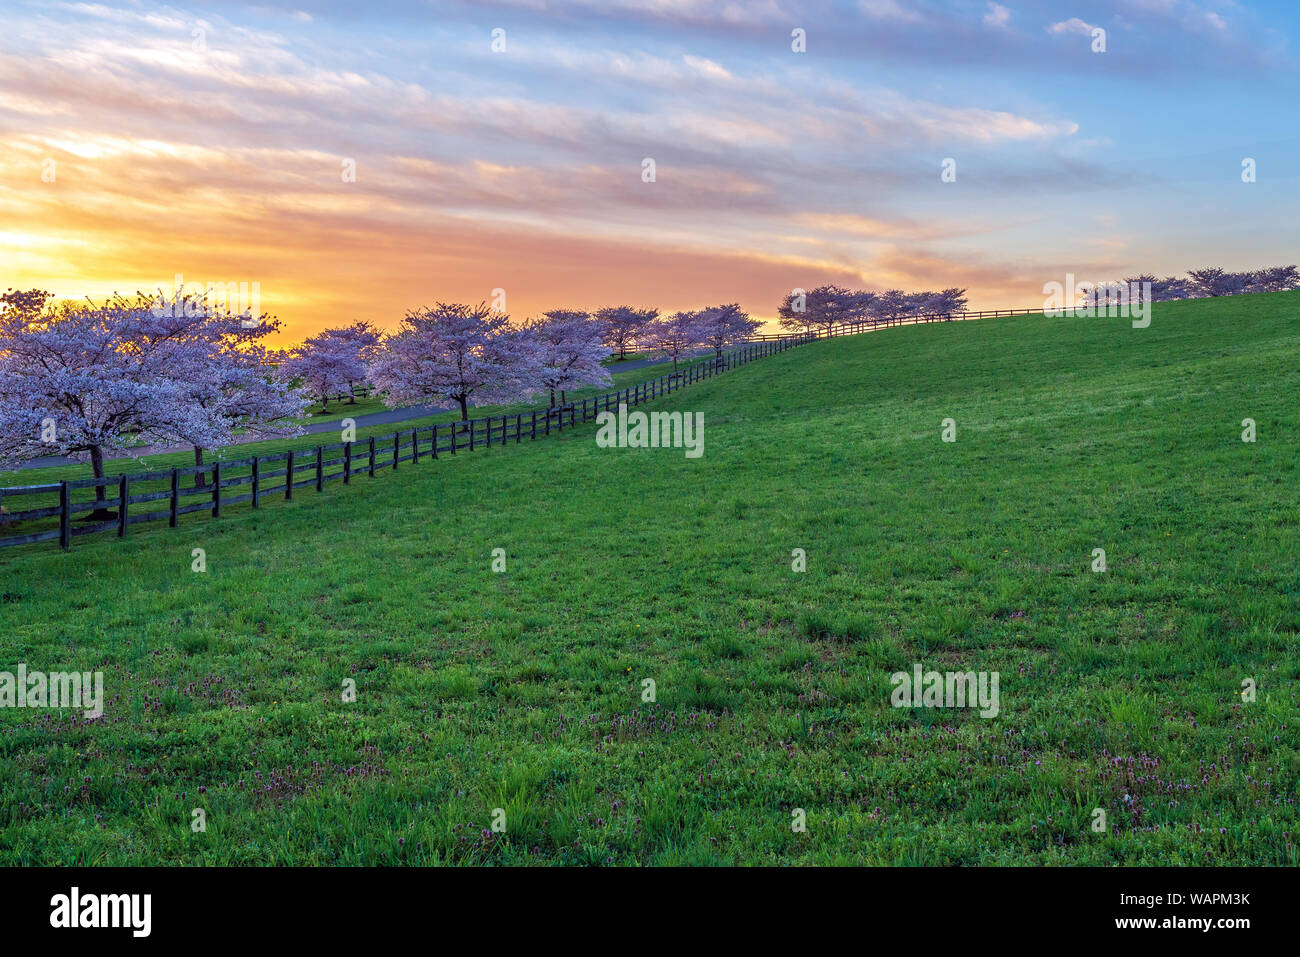 Blooming cherry trees, illuminated by late afternoon light, line a long driveway and fence. Stock Photo